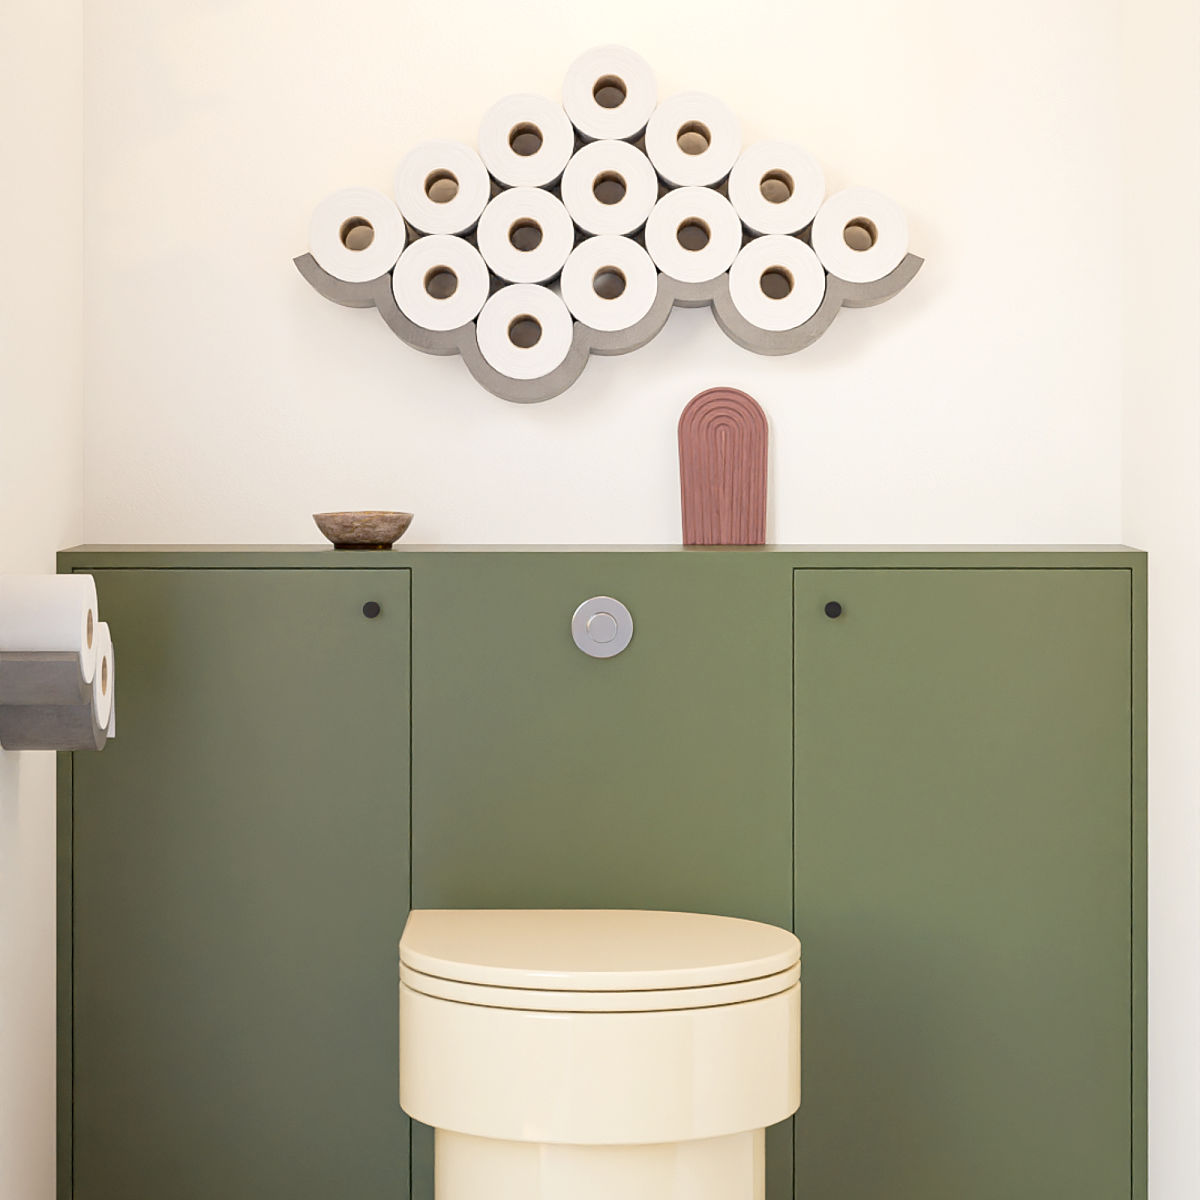 Cloudy Day Toilet Paper Storage | toilet paper holder ...